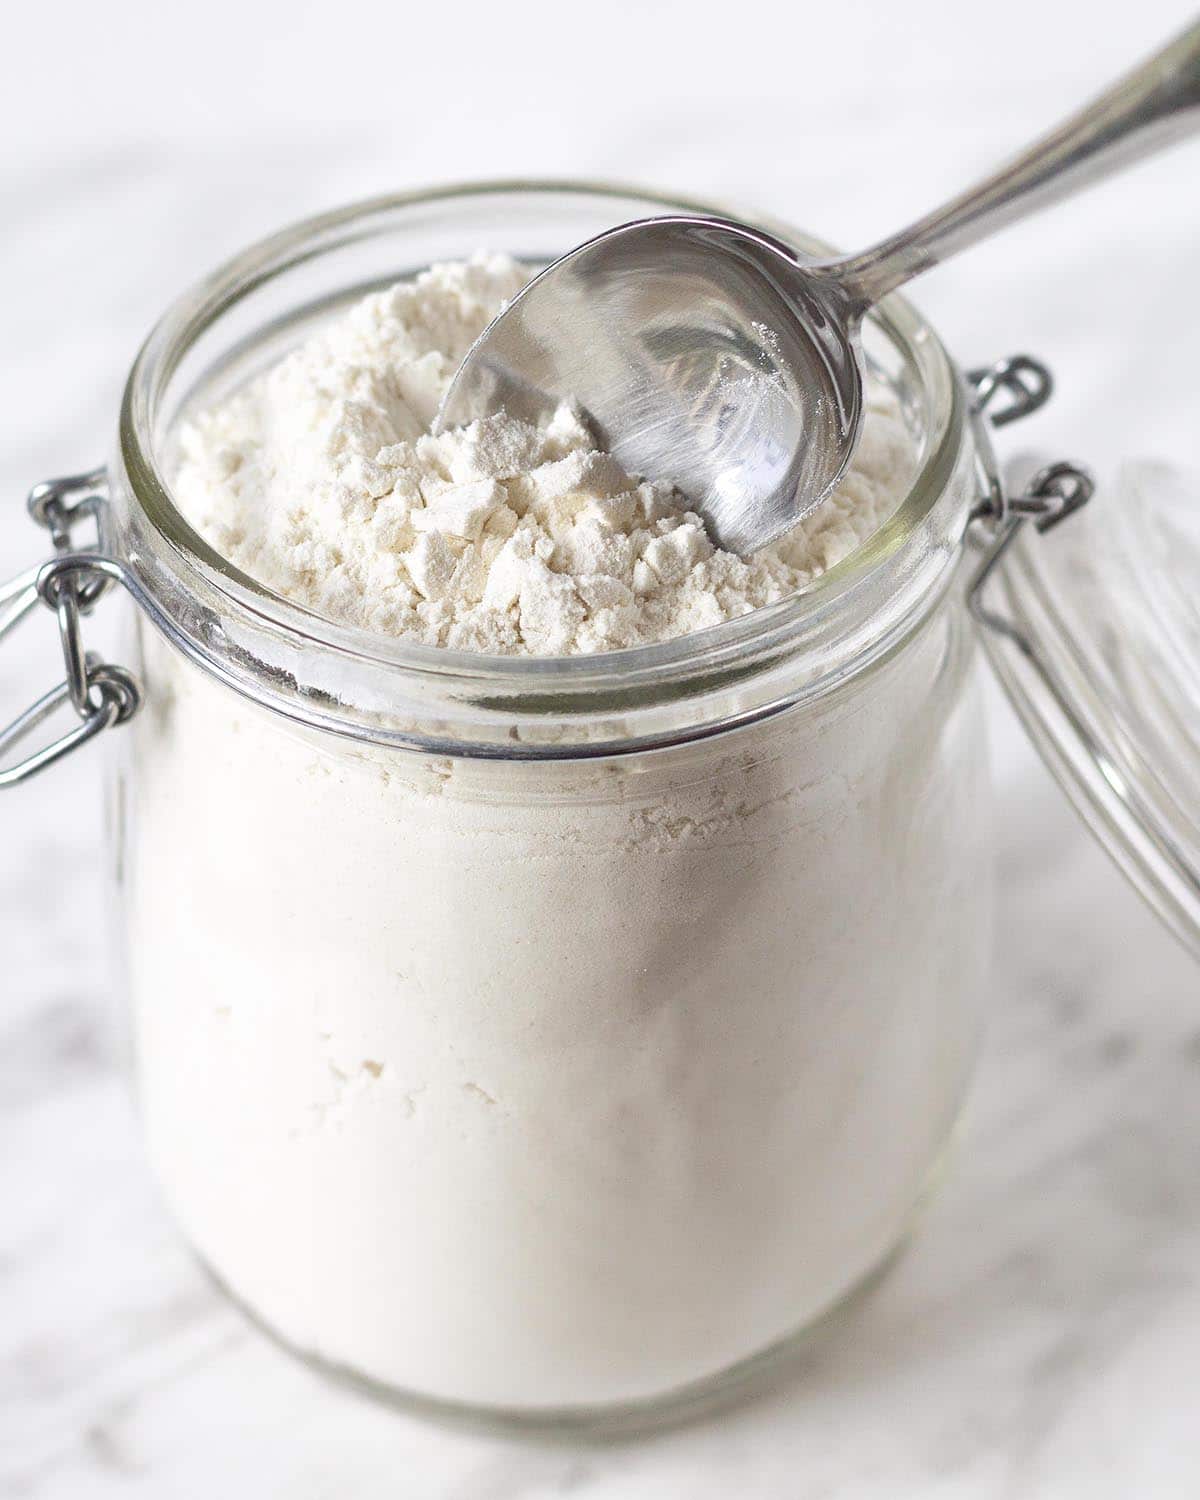 A spoon in a jar of flour, the spoon is fluffing the flour up before scooping it out for measuring.